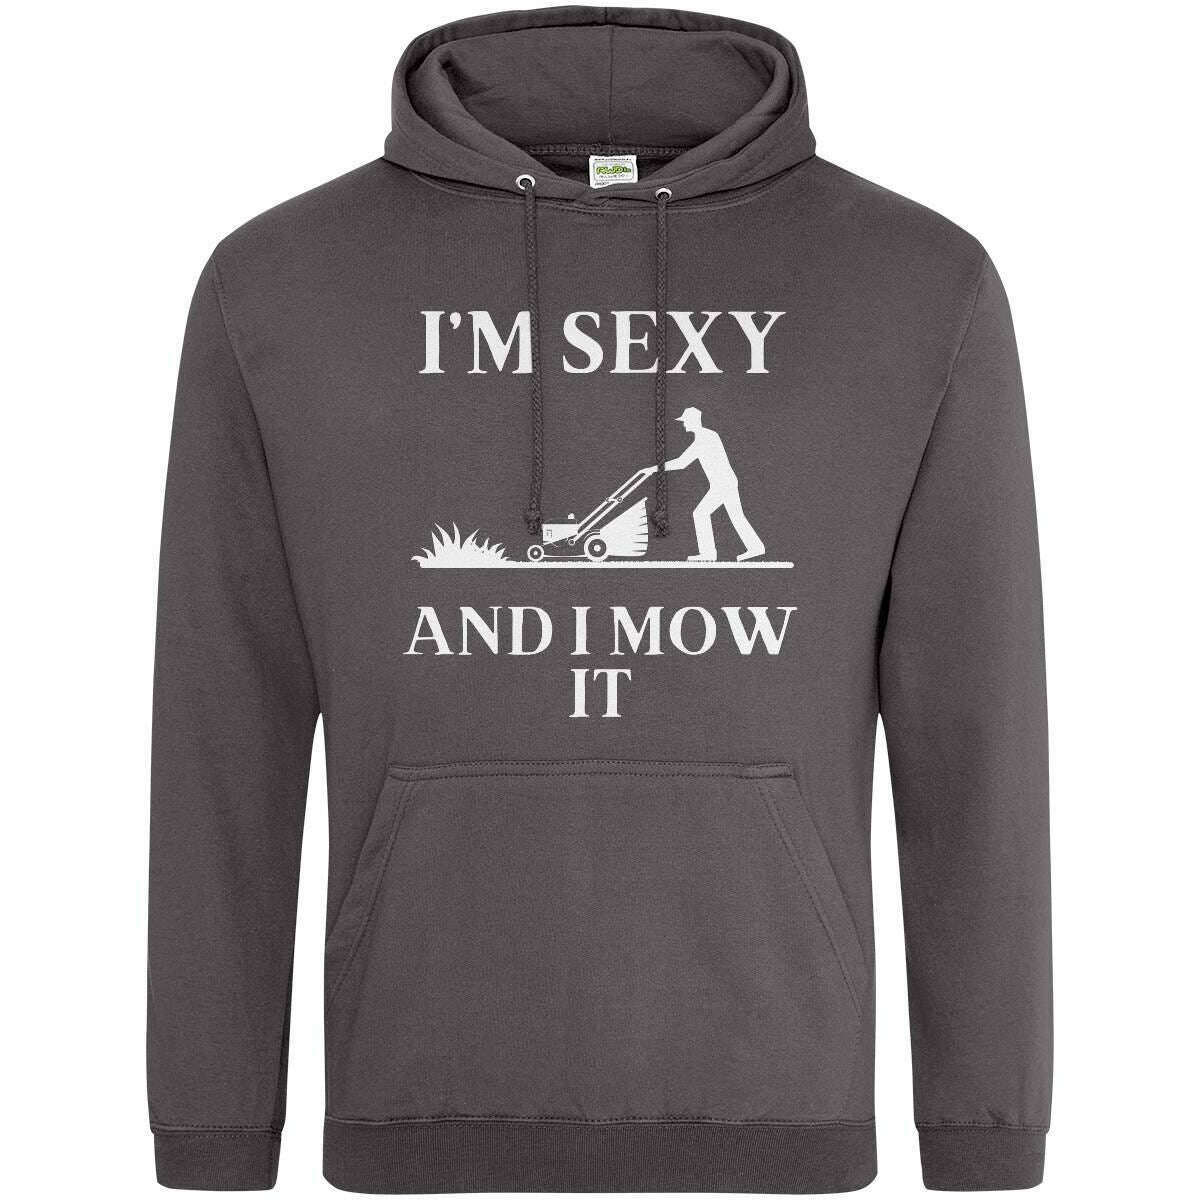 Teemarkable! I’m Sexy and I Mow It Hoodie